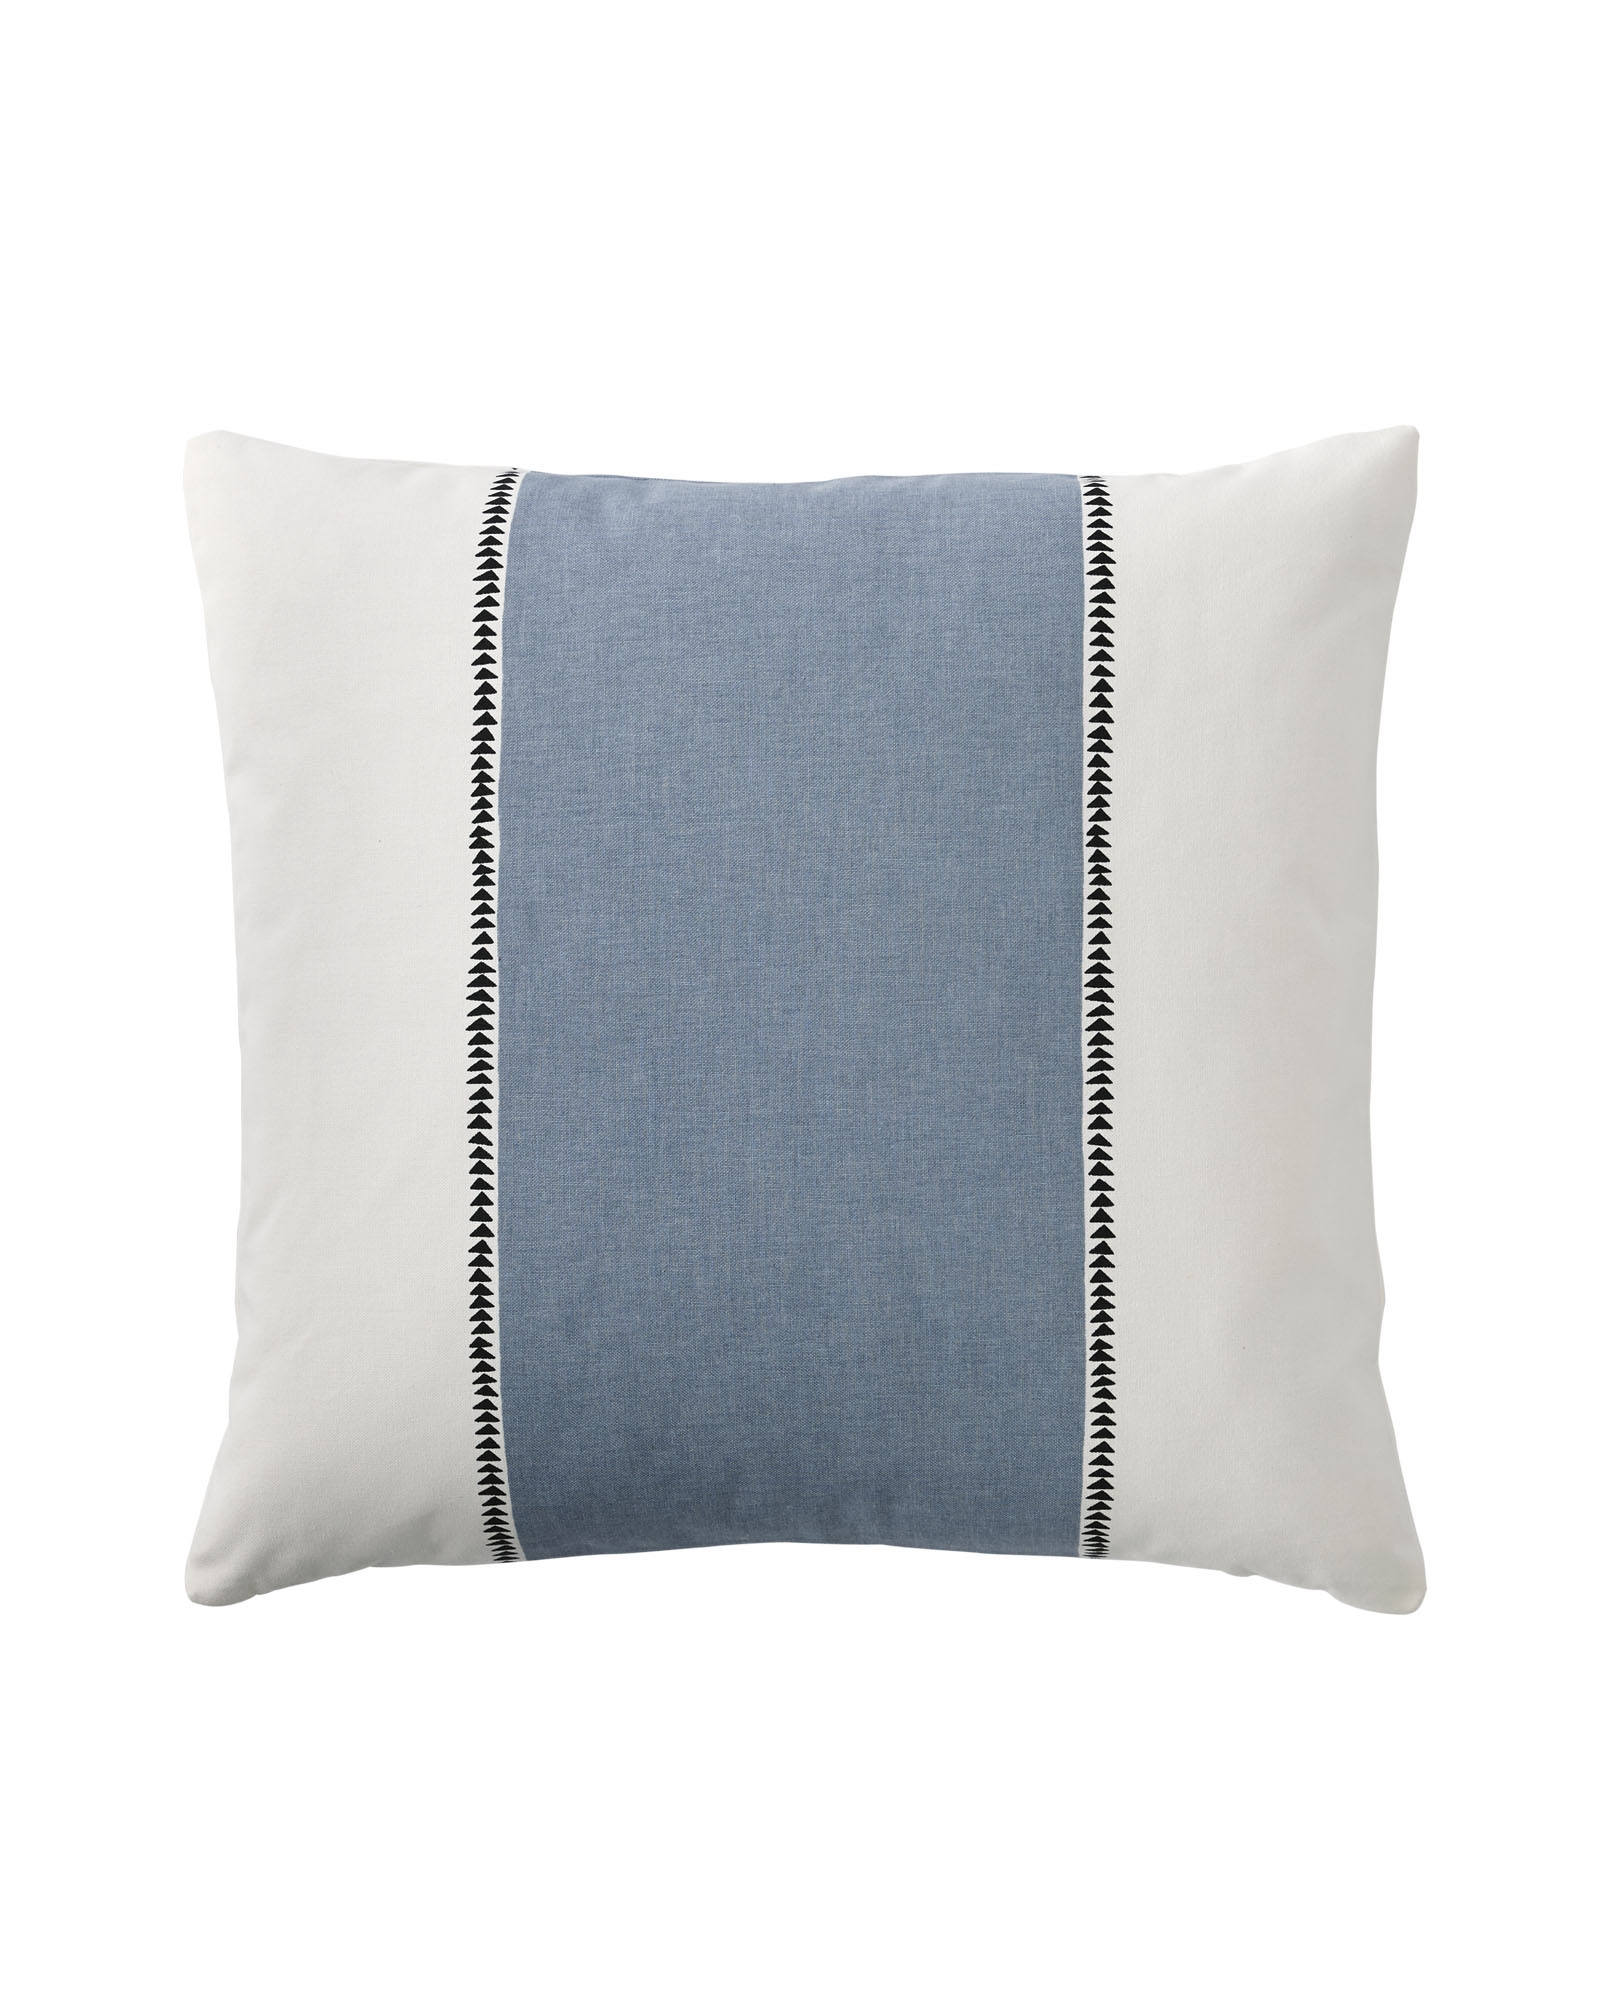 Racing Stripe Pillow Covers - Chambray-20"SQ-Insert sold separately - Image 0